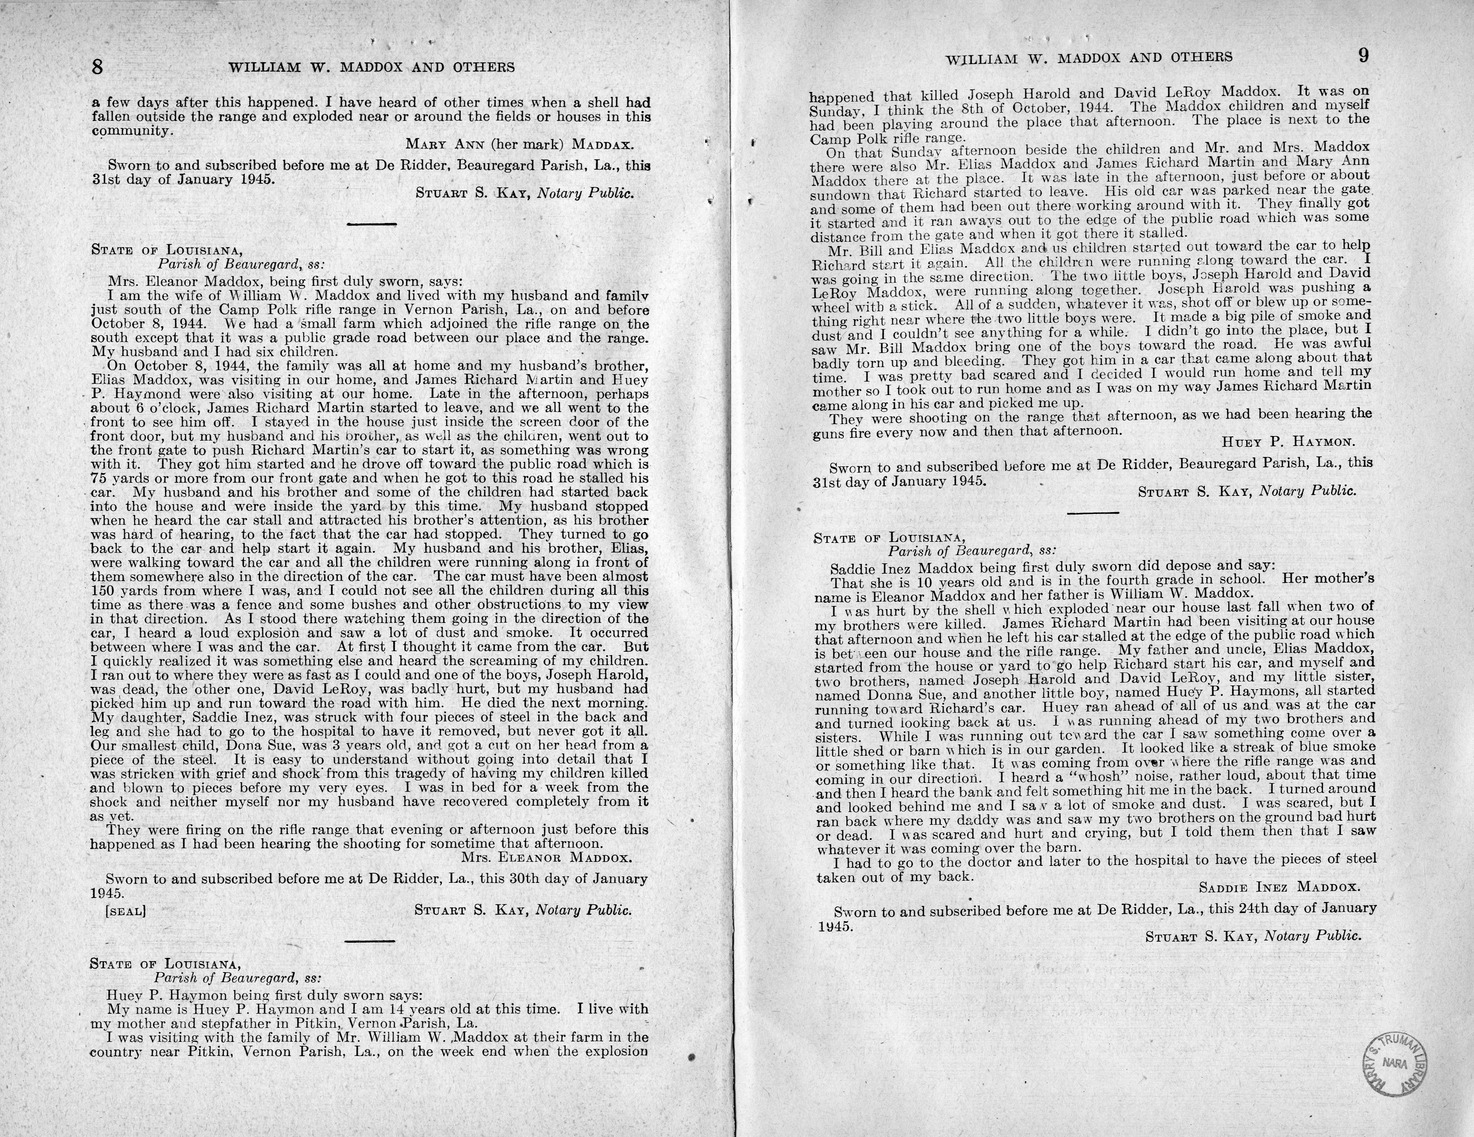 Memorandum from Frederick J. Bailey to M. C. Latta, H.R. 1564, For the Relief of William W. Maddox and the Legal Guardian of Donna Sue Maddox and Saddie Inez Maddox, with Attachments